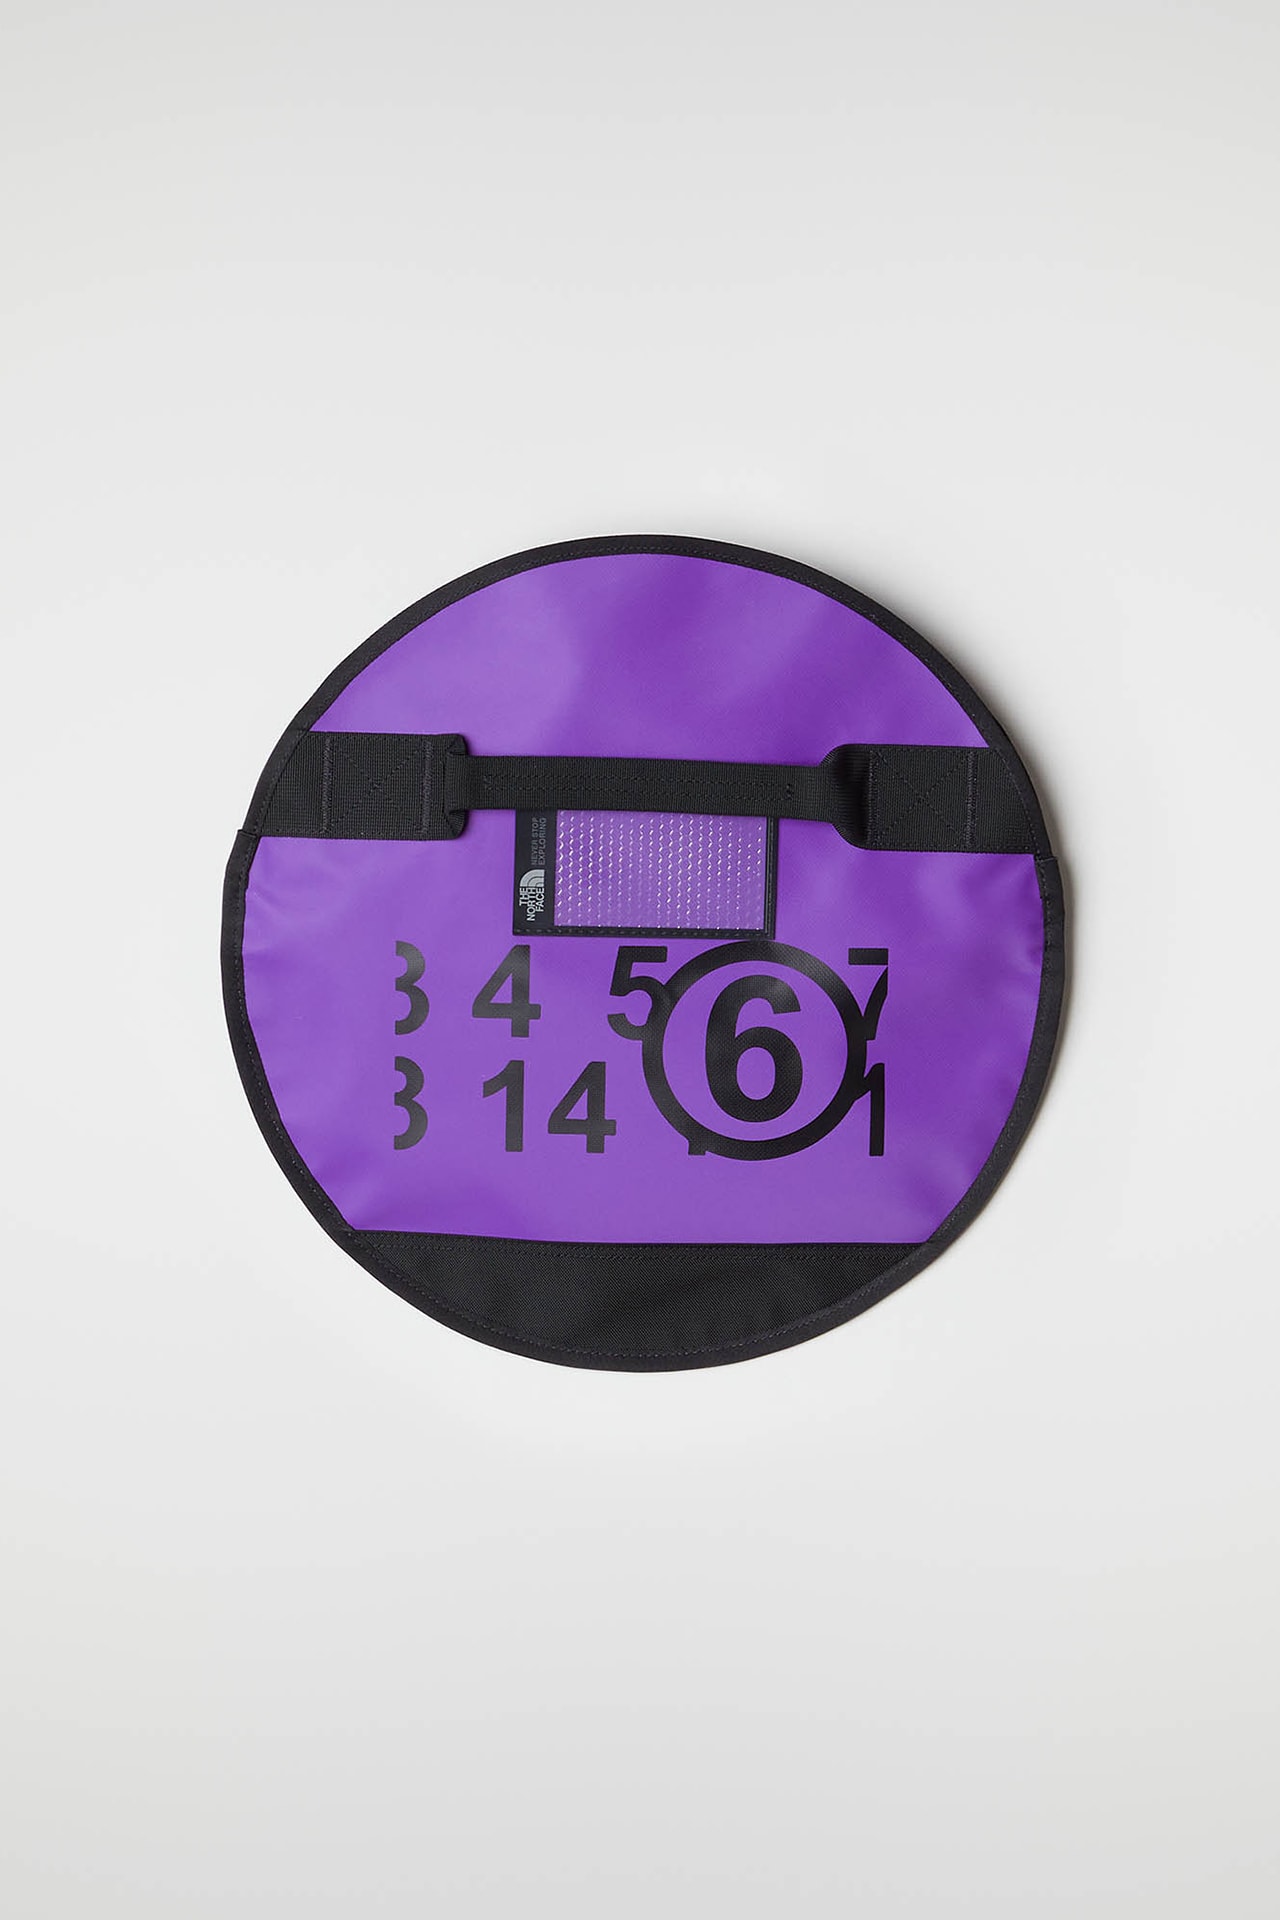 MM6 Maison Margiela The North Face Collaboration Fall Winter 2020 Circle Clutch Purple